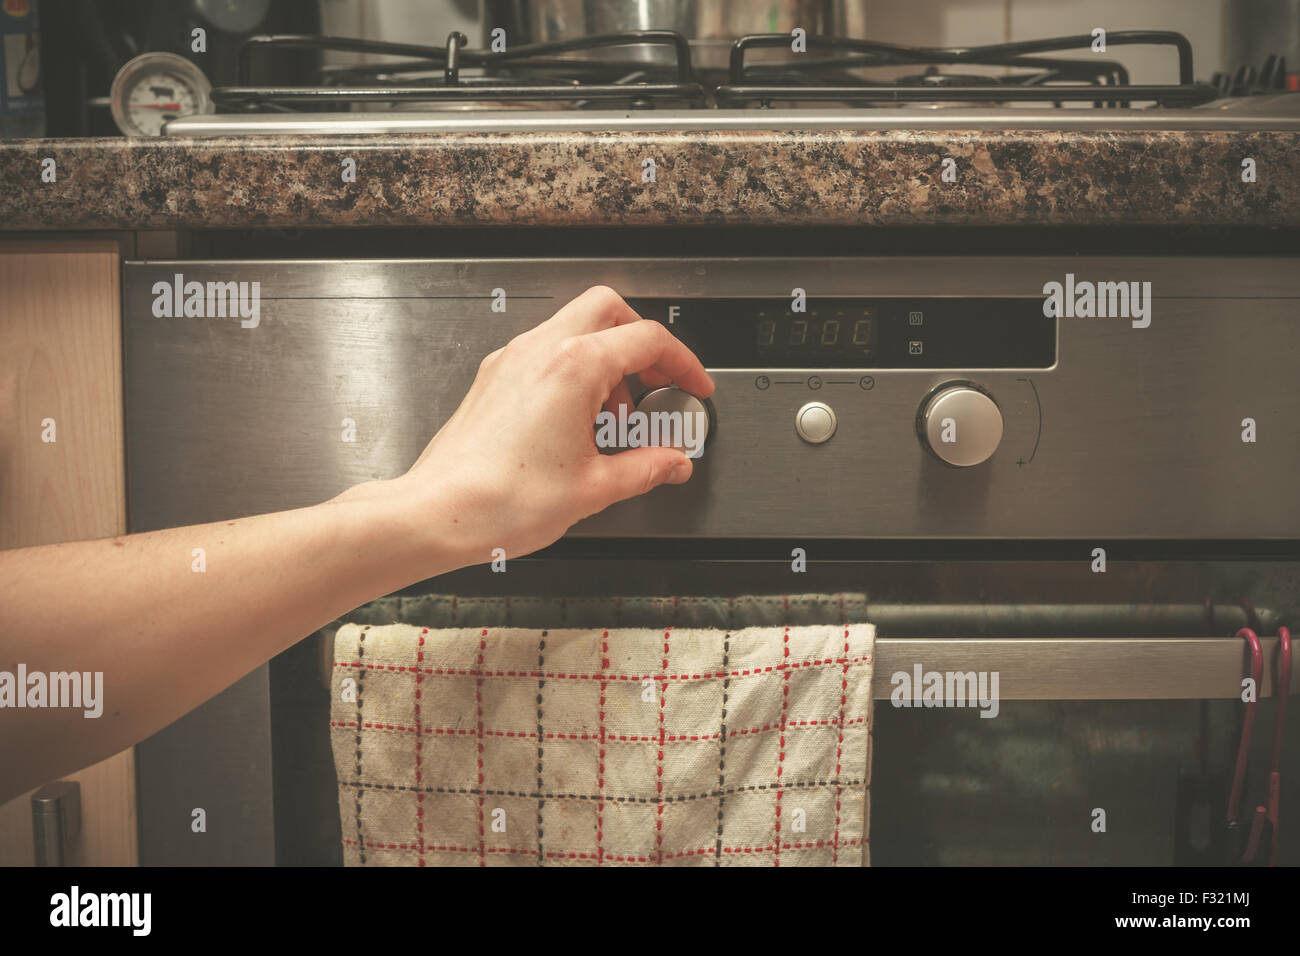 The hand of a young woman is turning the knob on a stove Stock Photo